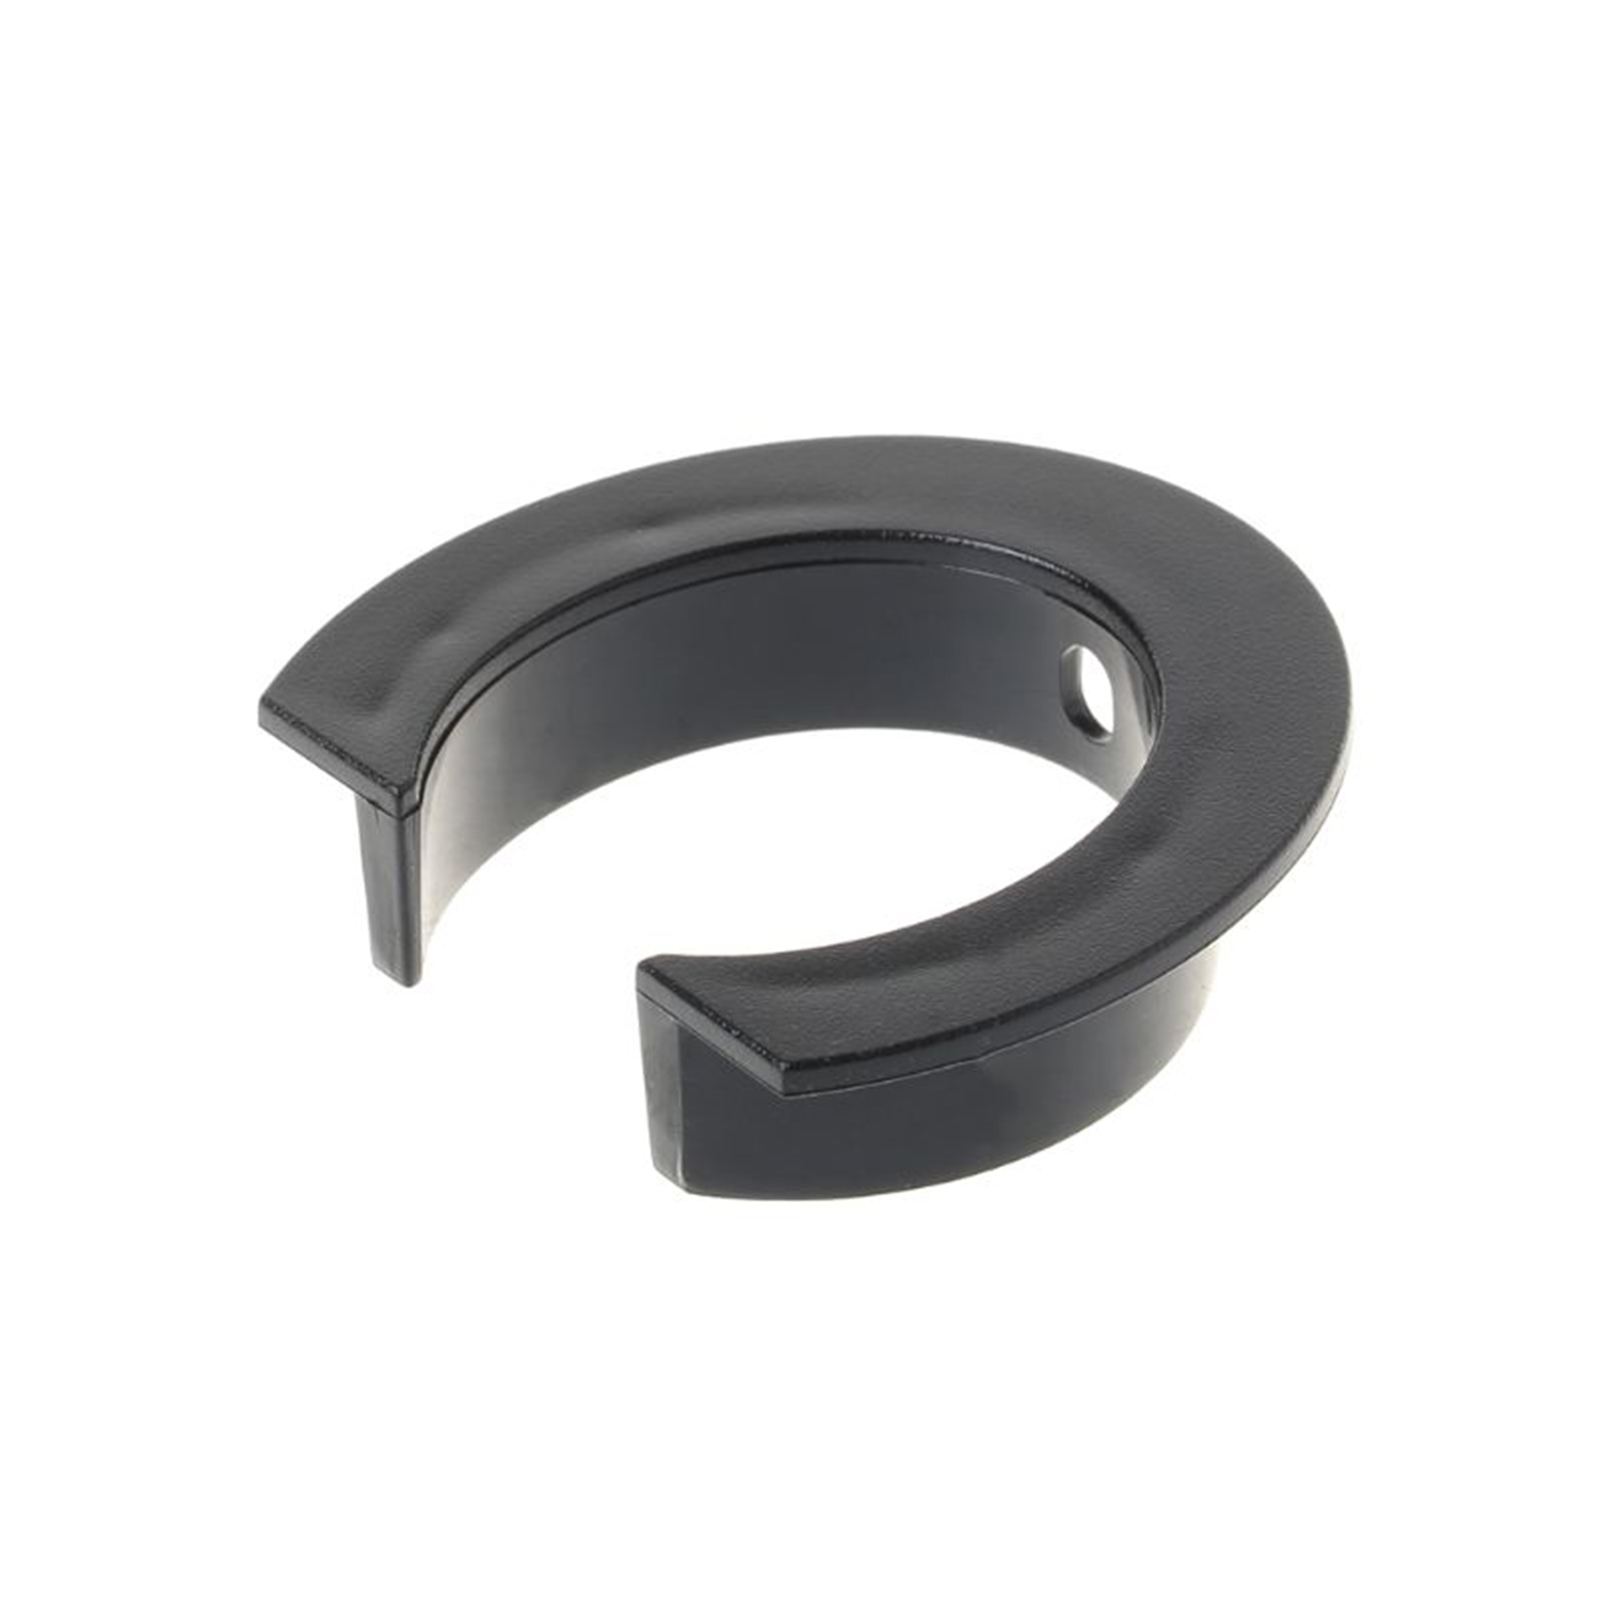 Insurance Circle Clasped Guard Ring Limit Ring For Ninebot MAX G30 kickScooter